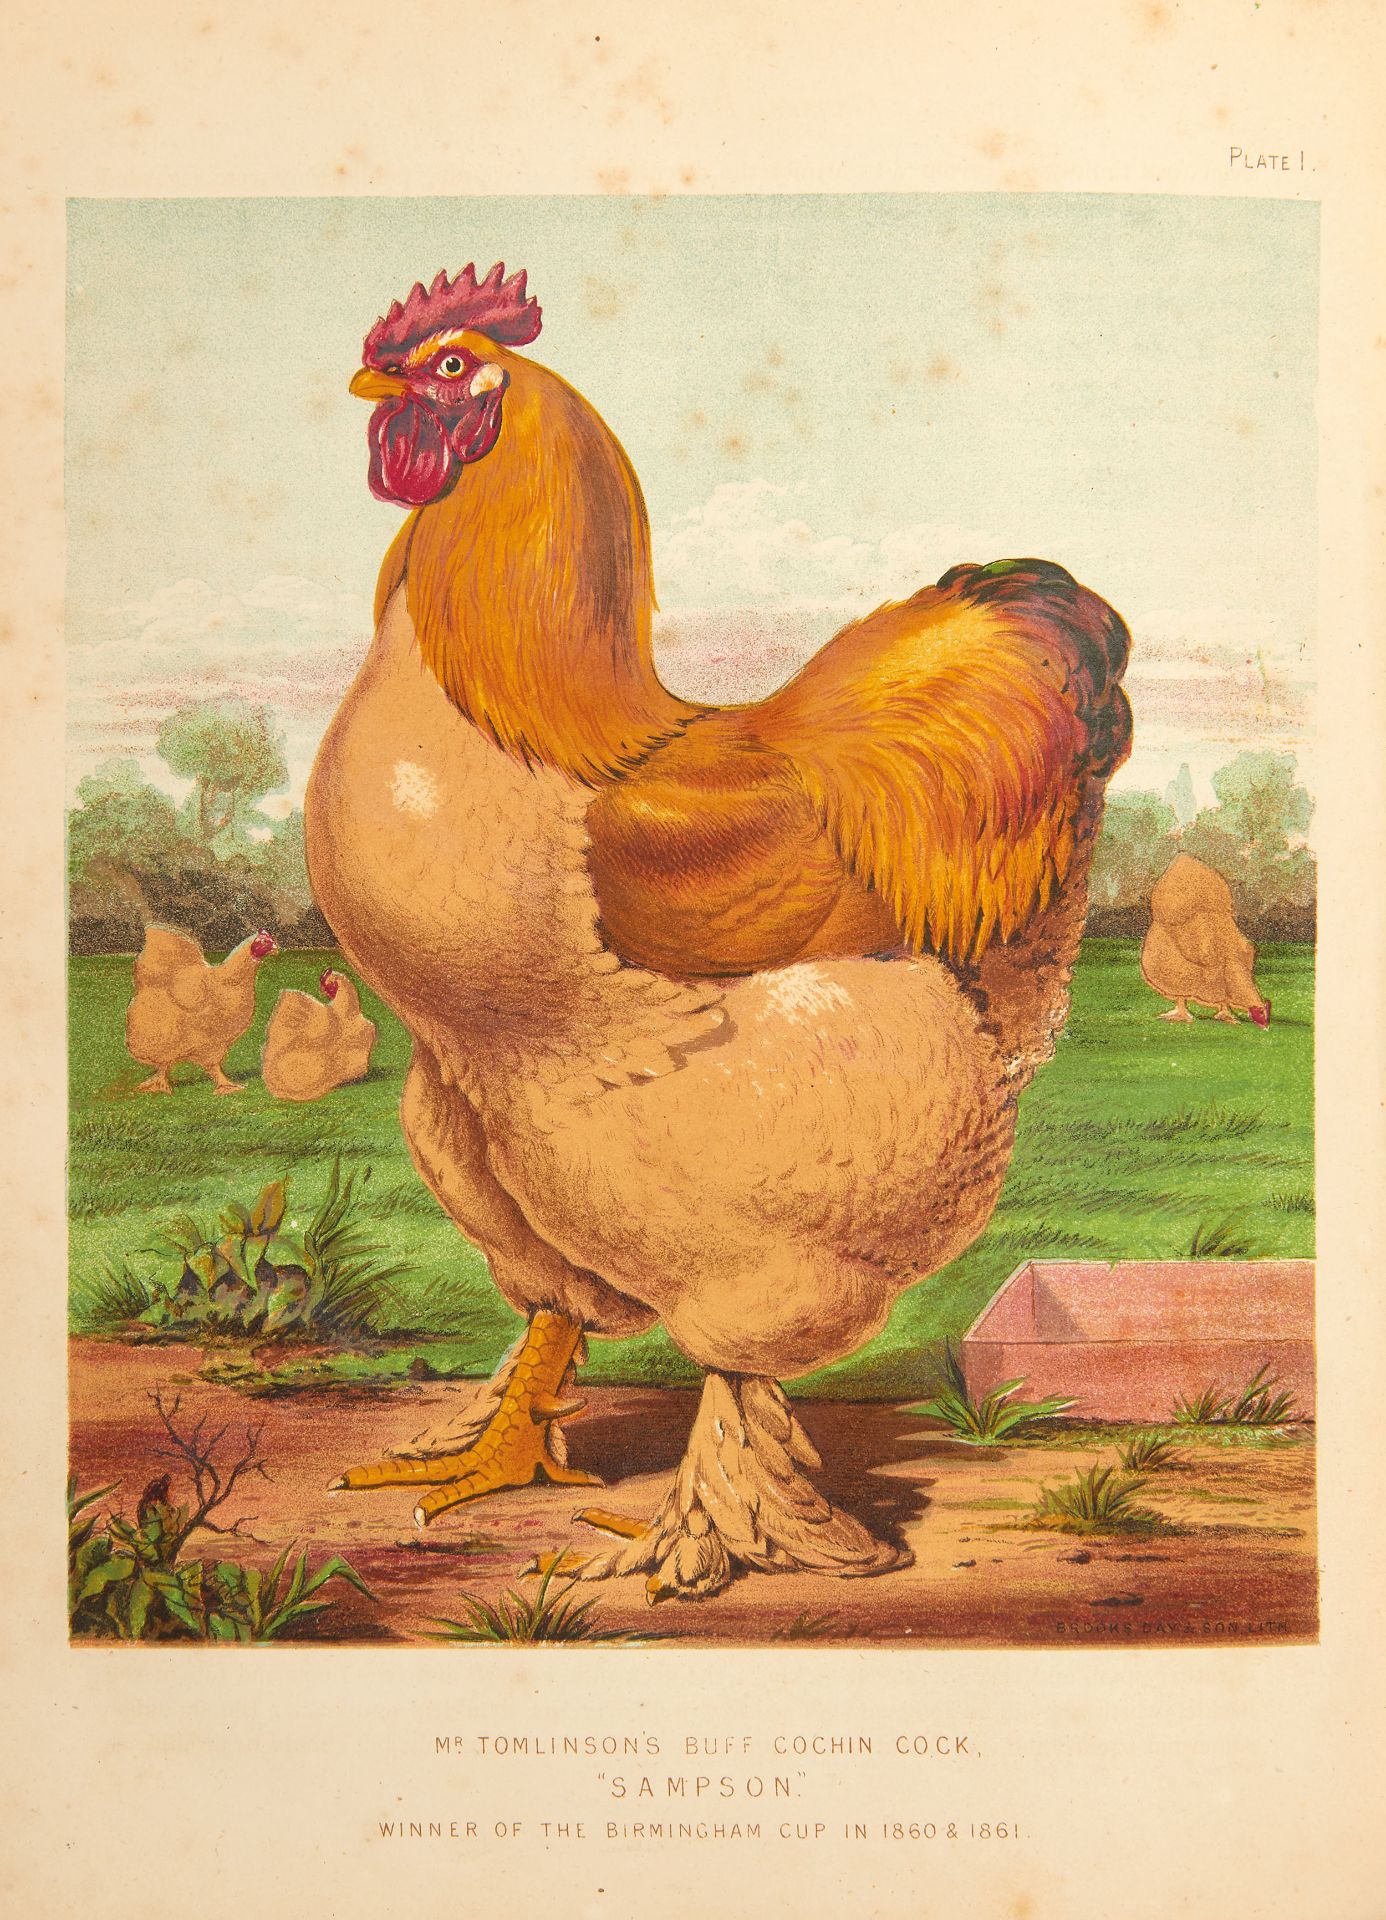 [AGRICULTURE] WRIGHT, Lewis. The illustrated book of poultry. London: Cassell, Petter & Galpin,